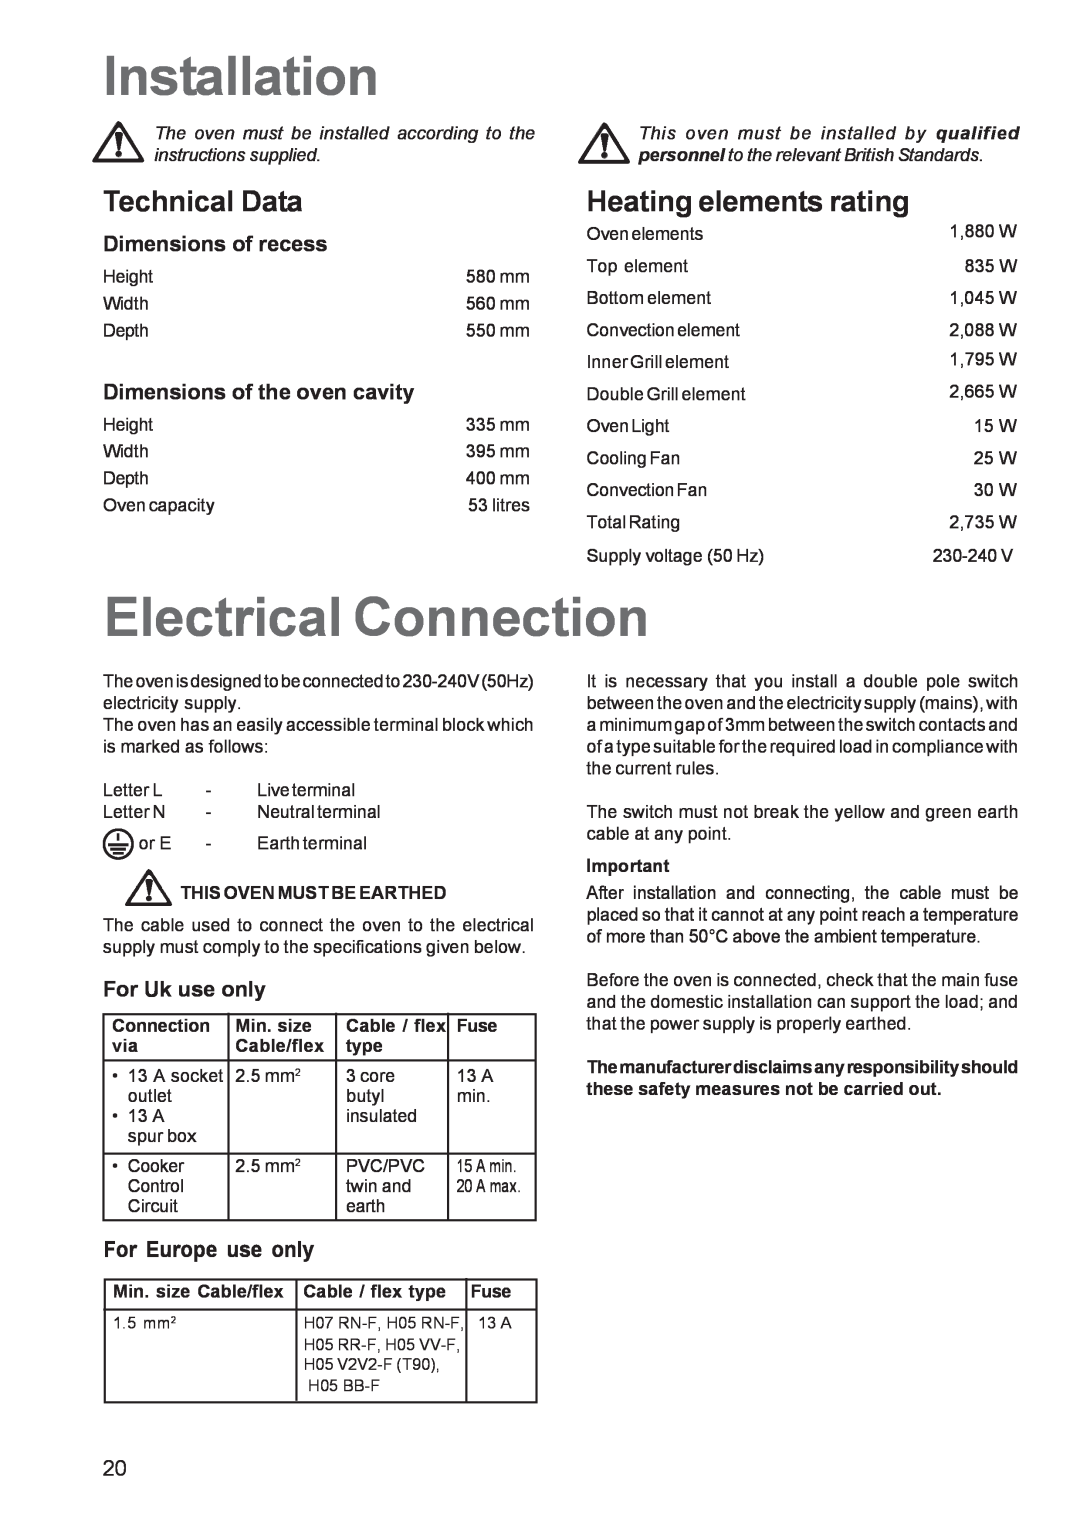 Zanussi ZBS 663 Installation, Electrical Connection, Technical Data, Heating elements rating, Dimensions of recess, Fuse 